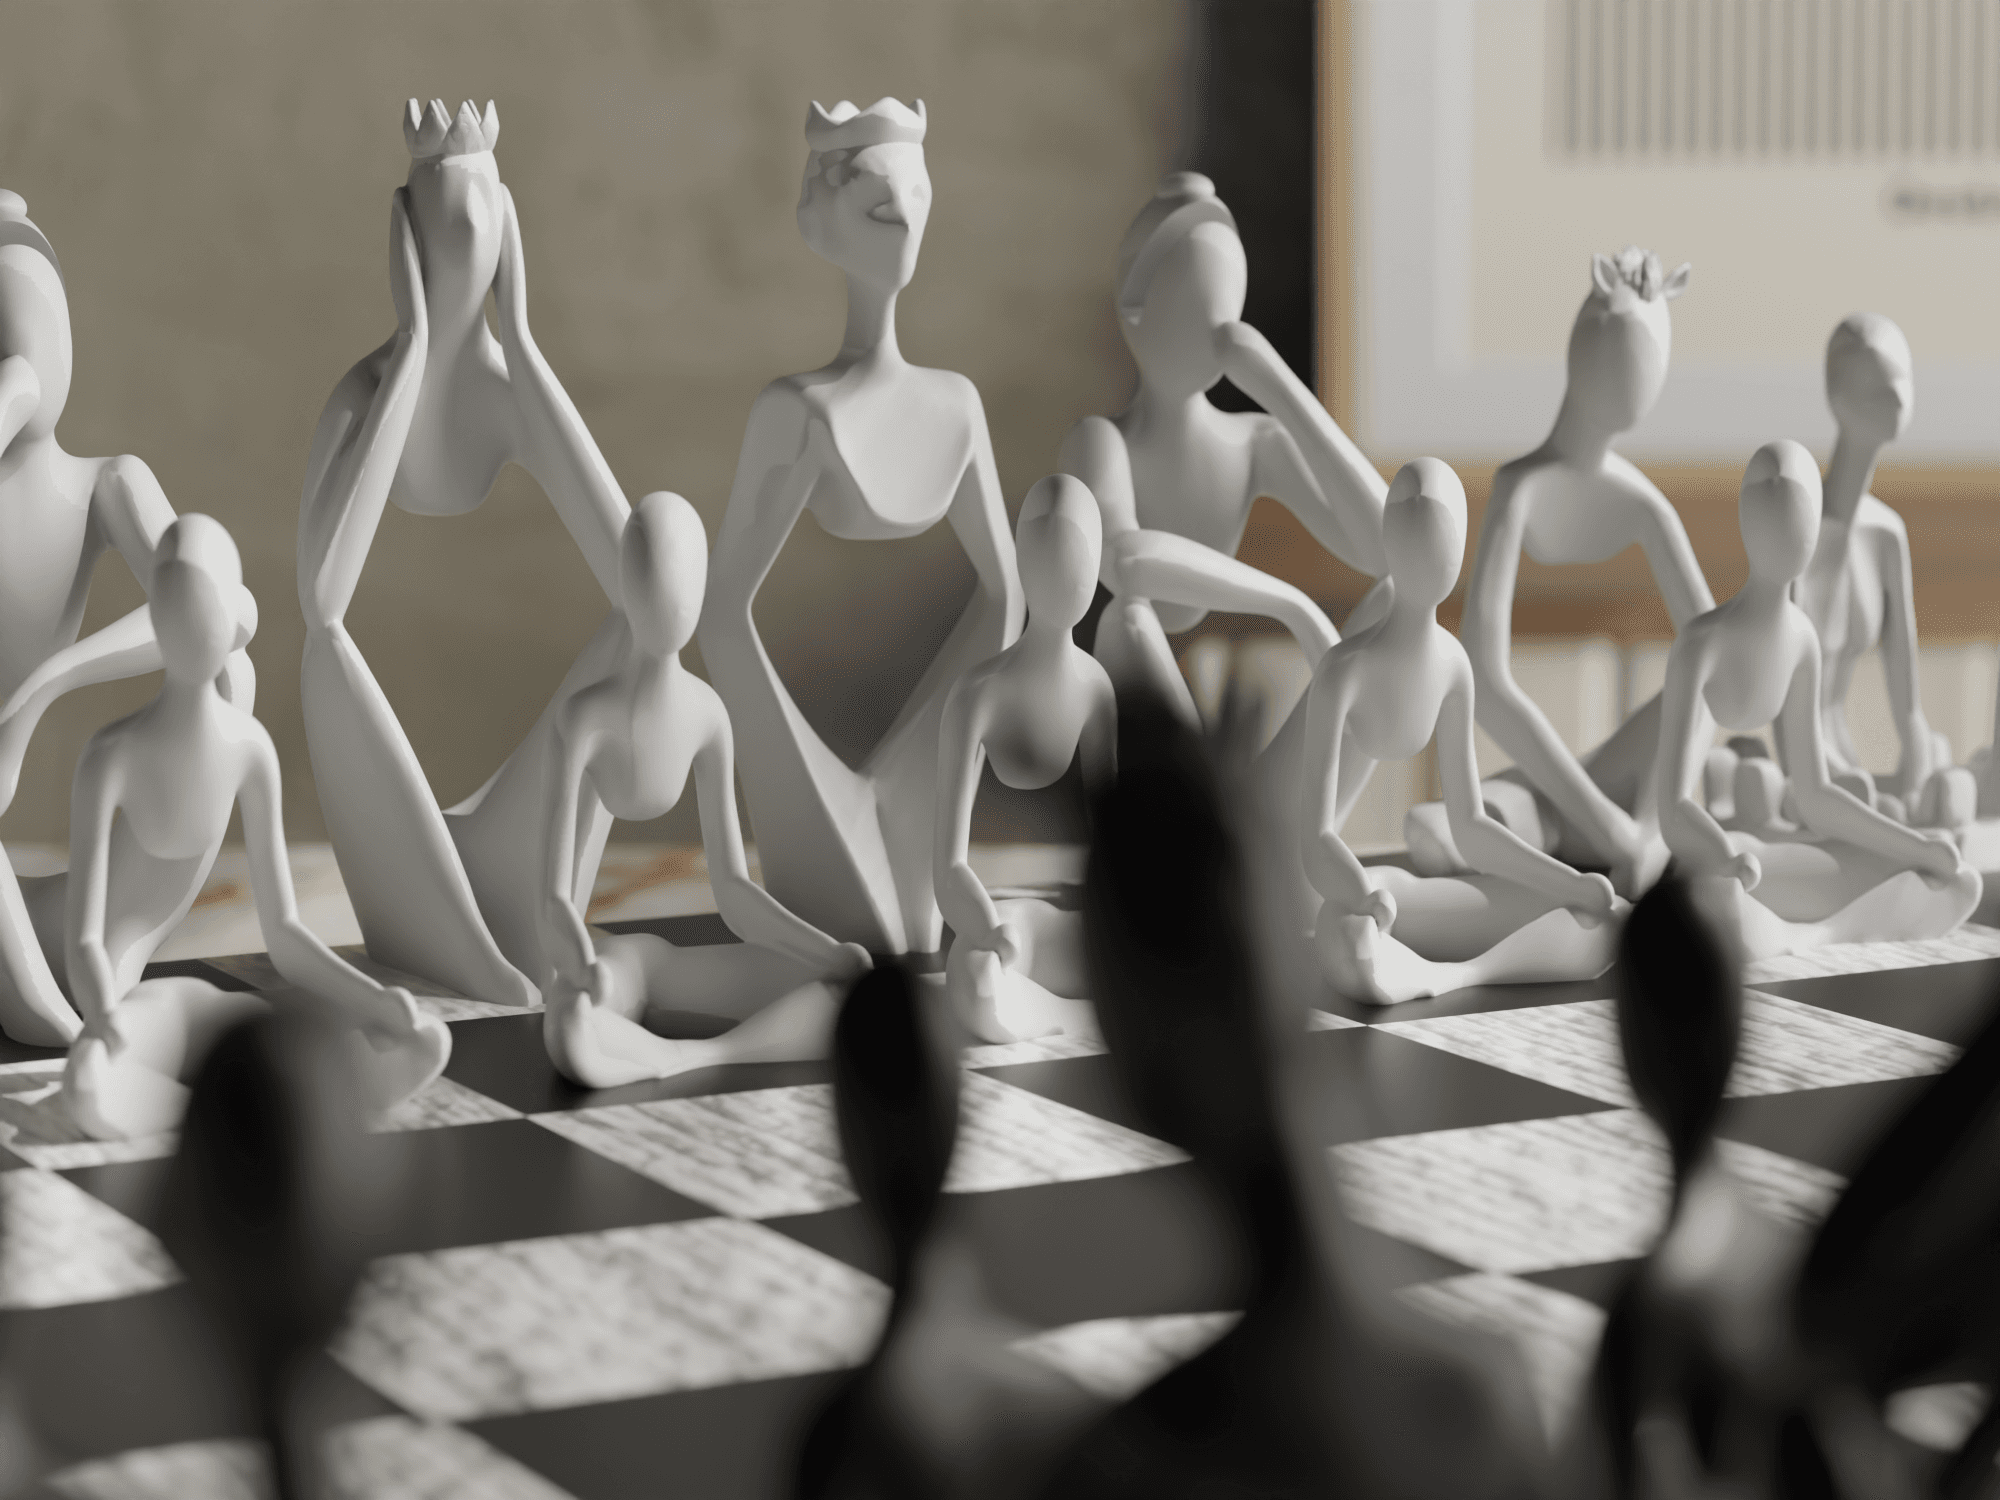 NObody's Game: A Chess Set Reimagined